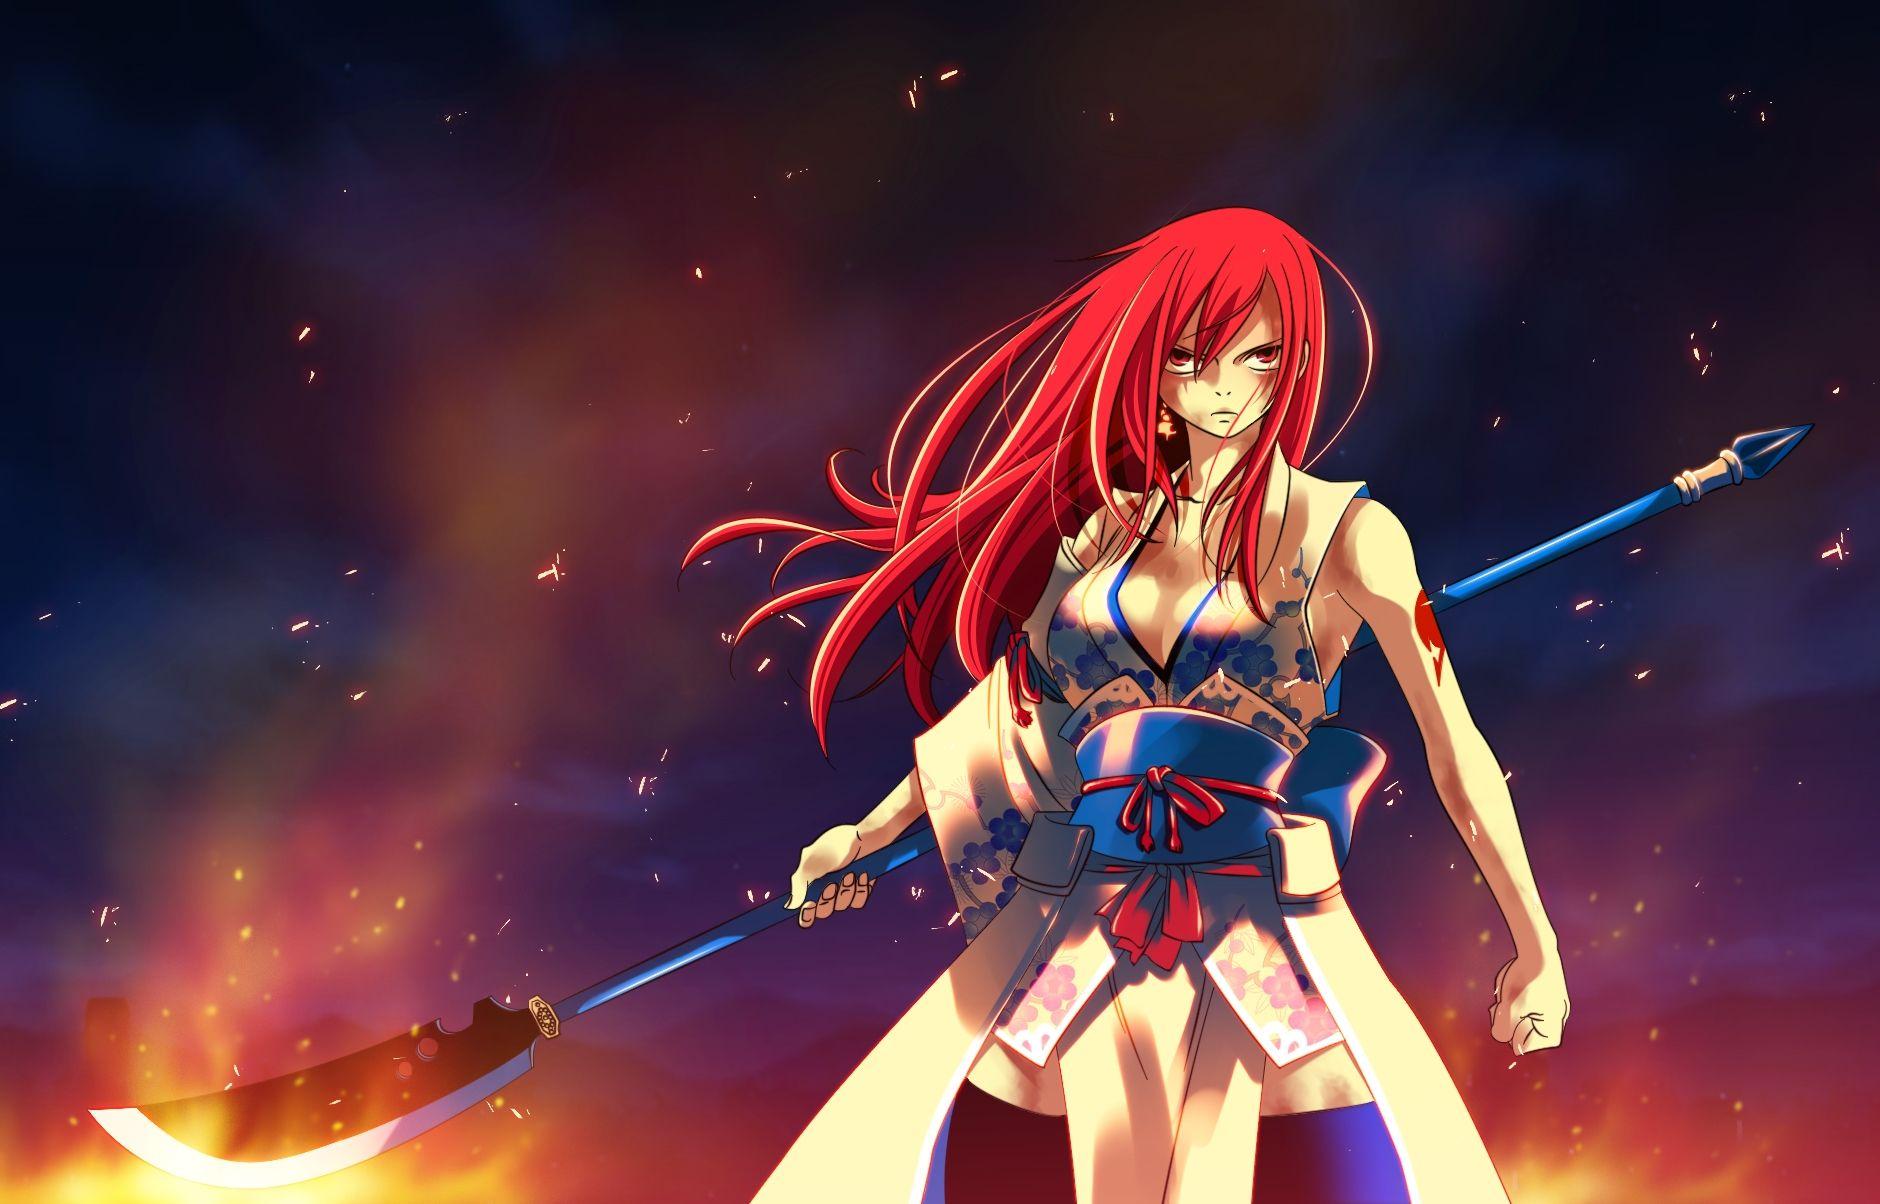 9. Erza Scarlet from Fairy Tail - wide 1